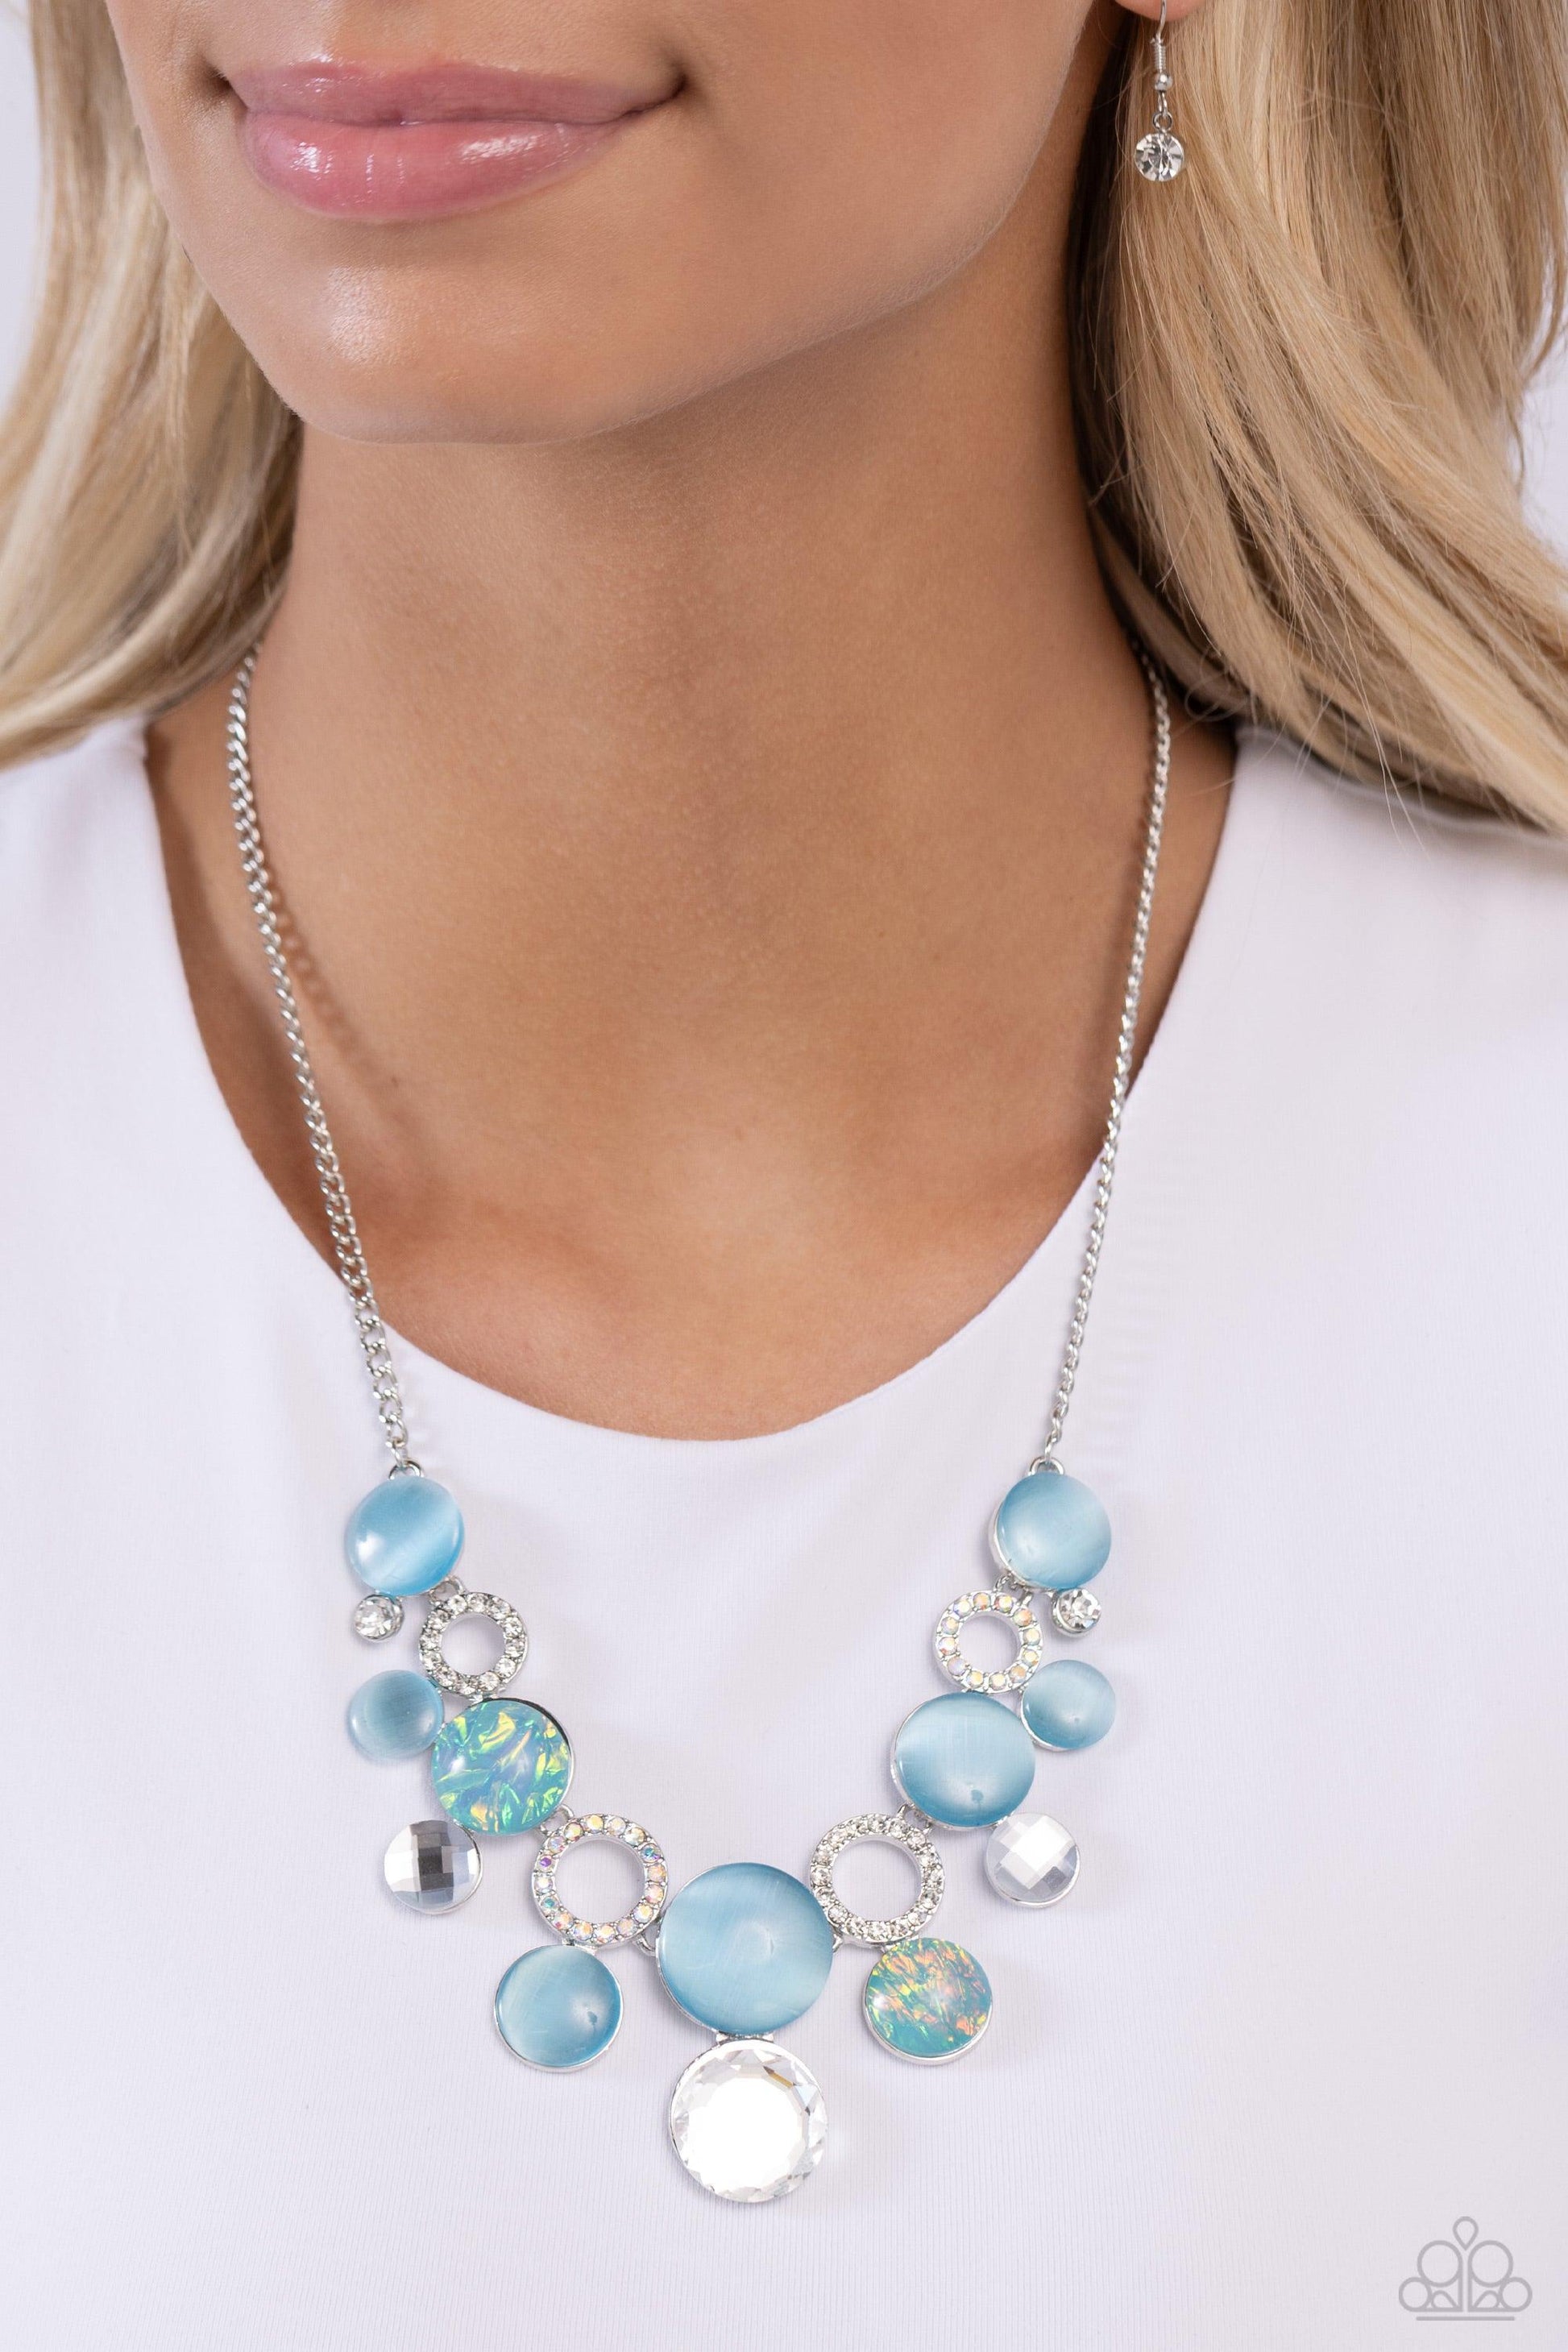 Paparazzi Accessories - Corporate Color - Blue Necklace - Bling by JessieK